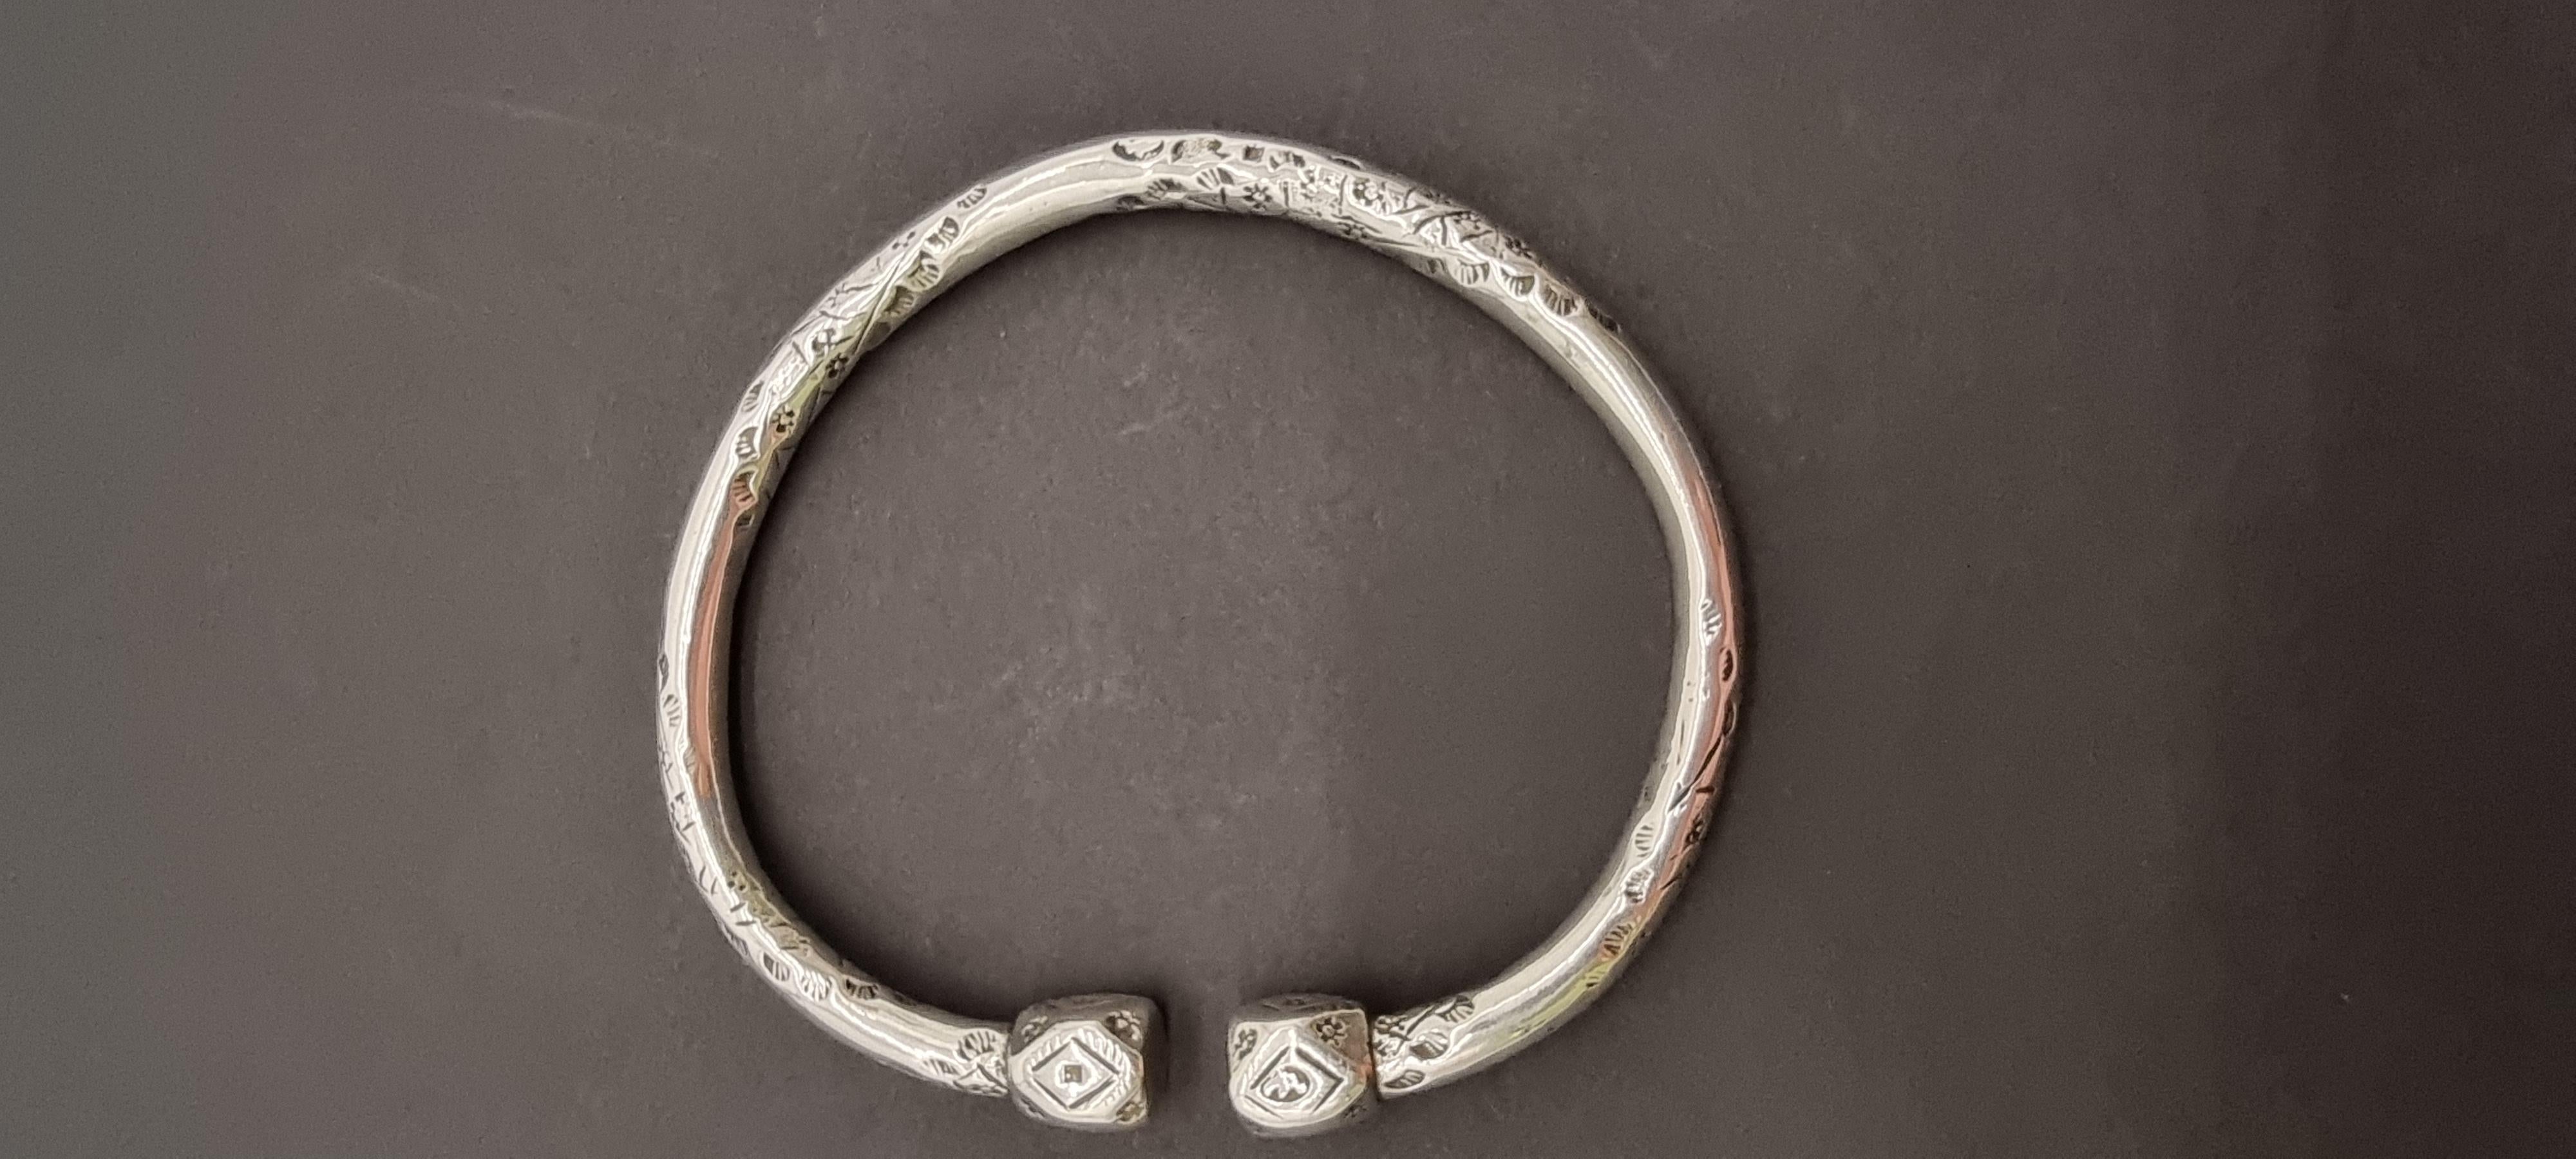 19th Century A pair of 19th century Portuguese solid silver arm bracelets